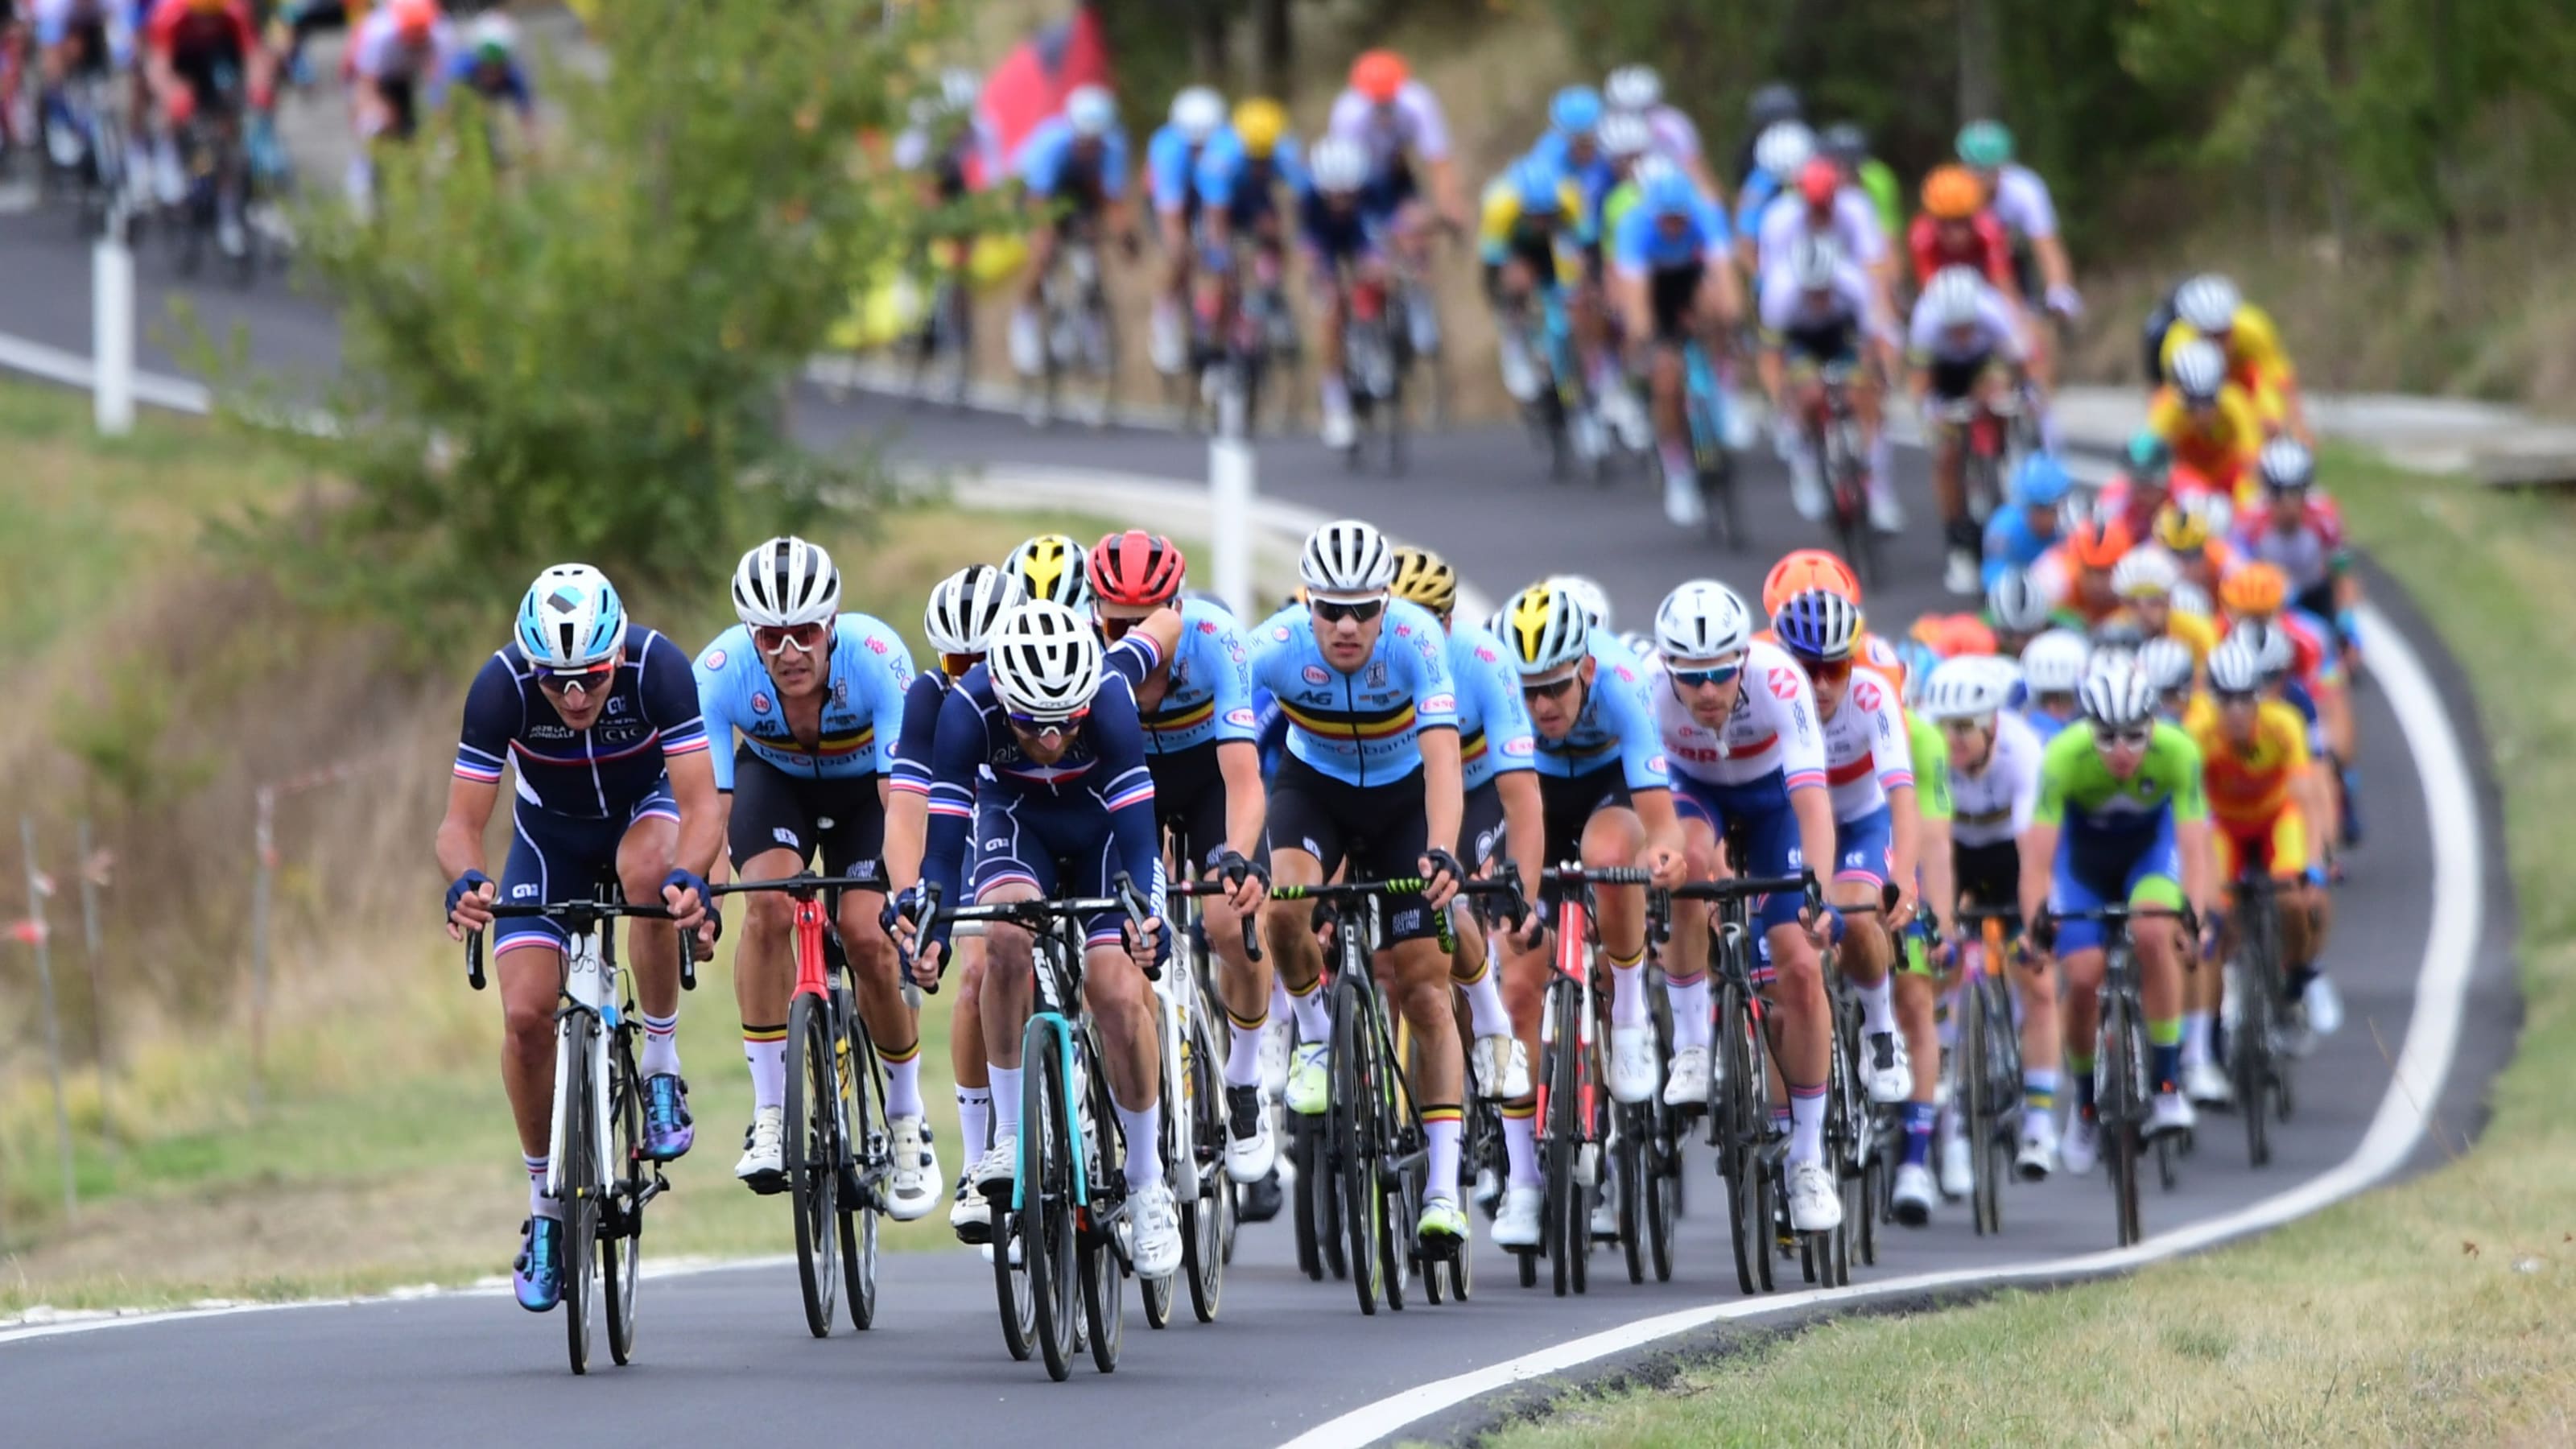 2021 Road Cycling Championships: Preview, stars involved, where to watch